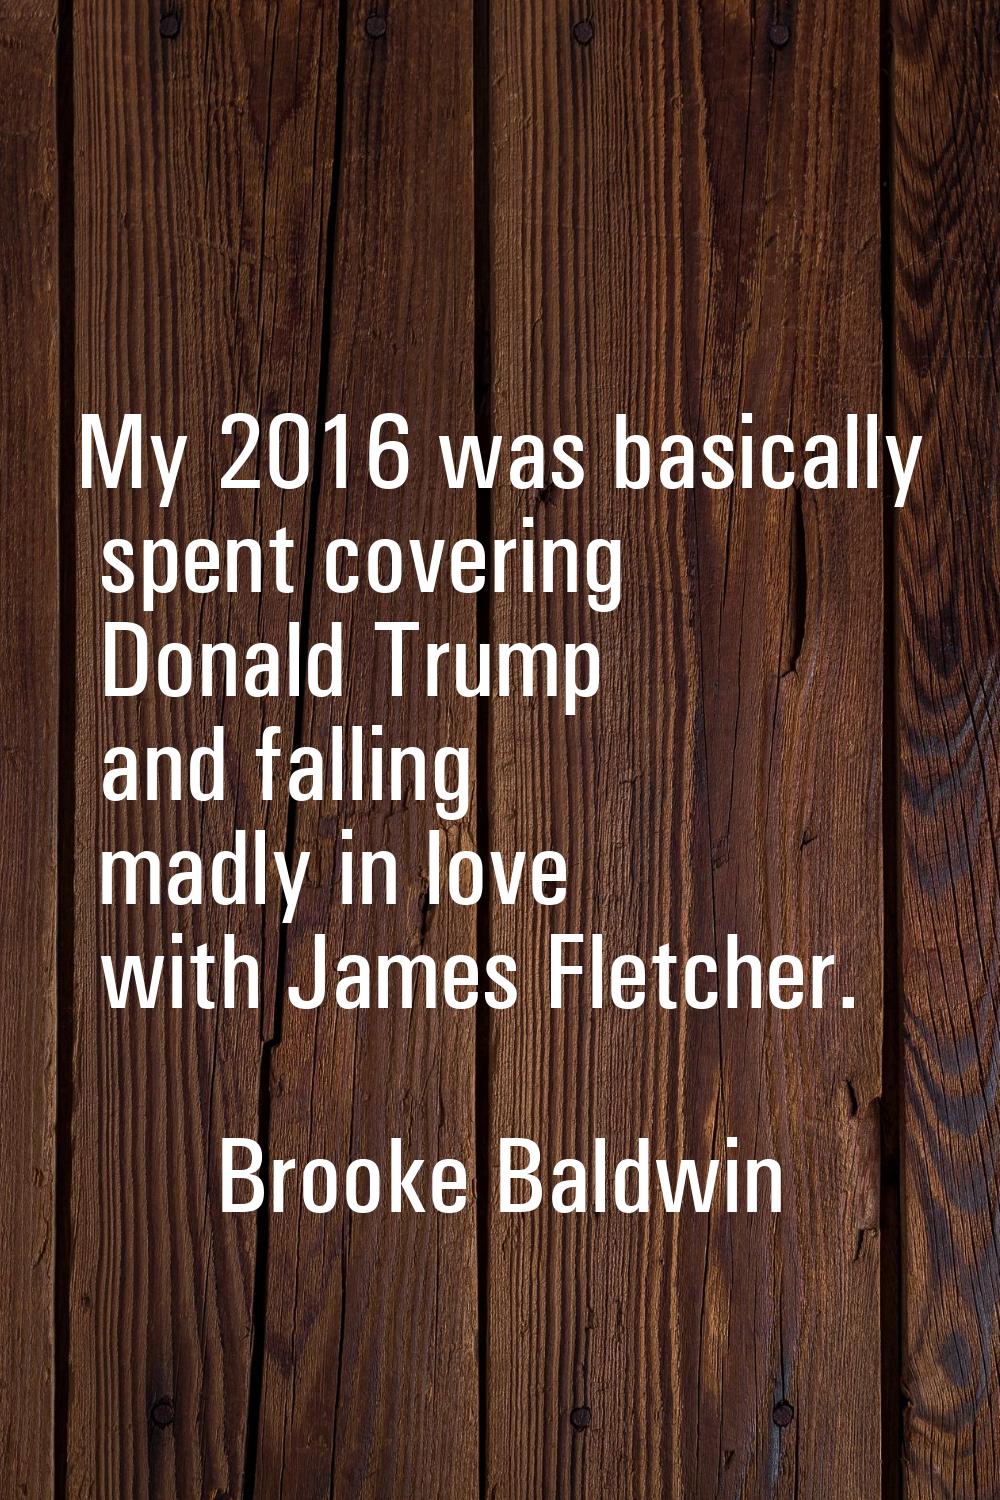 My 2016 was basically spent covering Donald Trump and falling madly in love with James Fletcher.